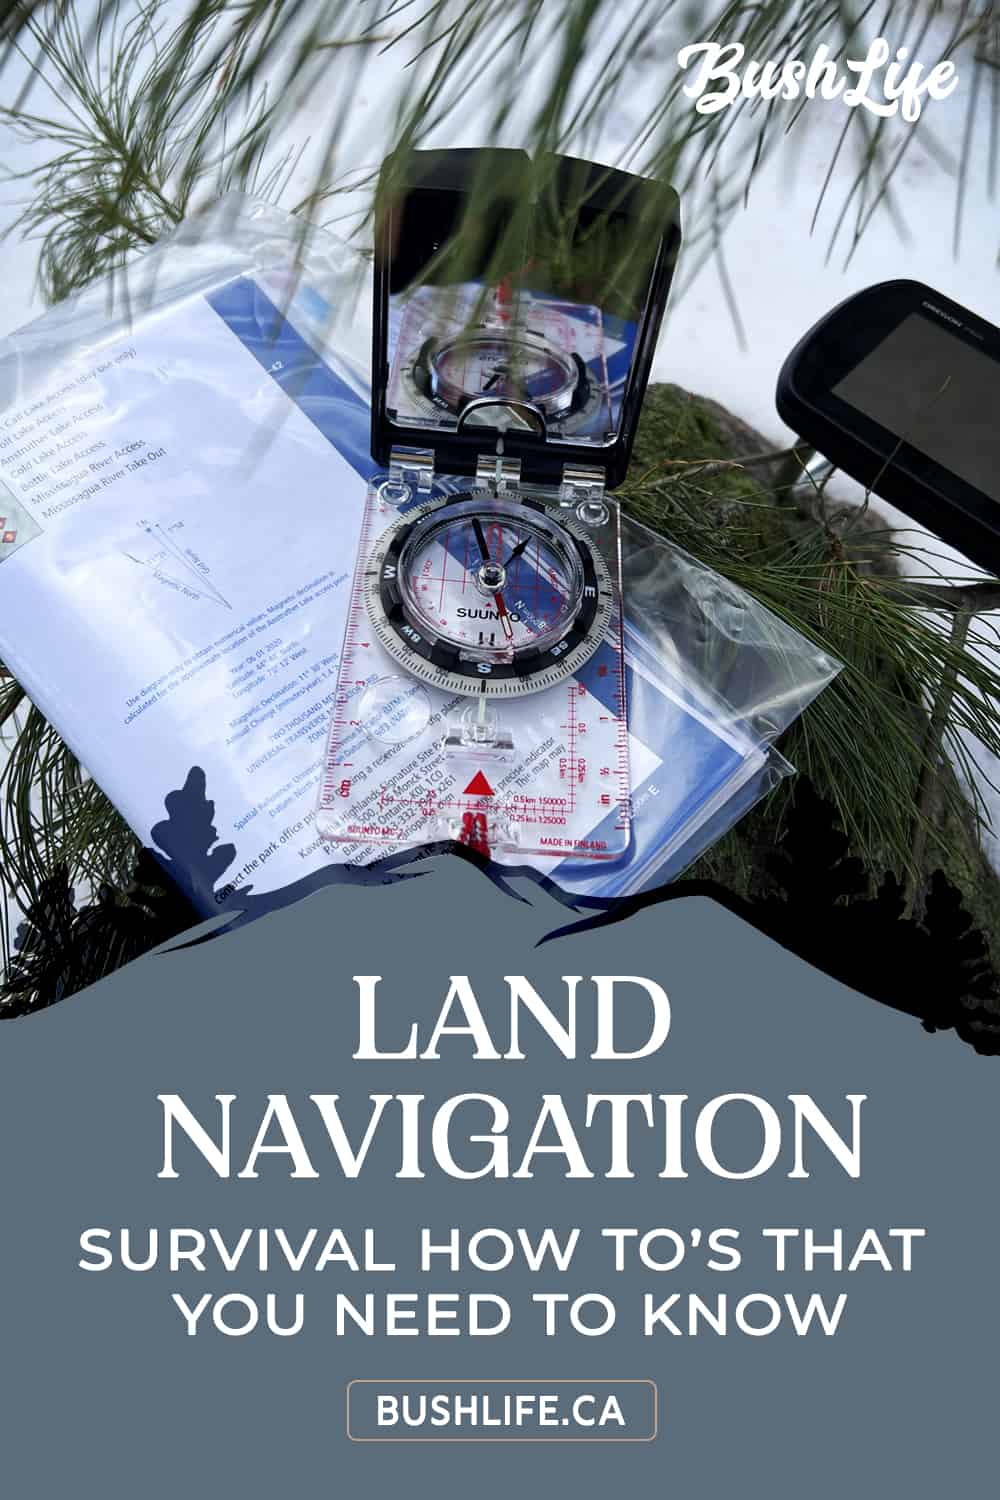 Land Navigation Survival How To's That You Need to Know